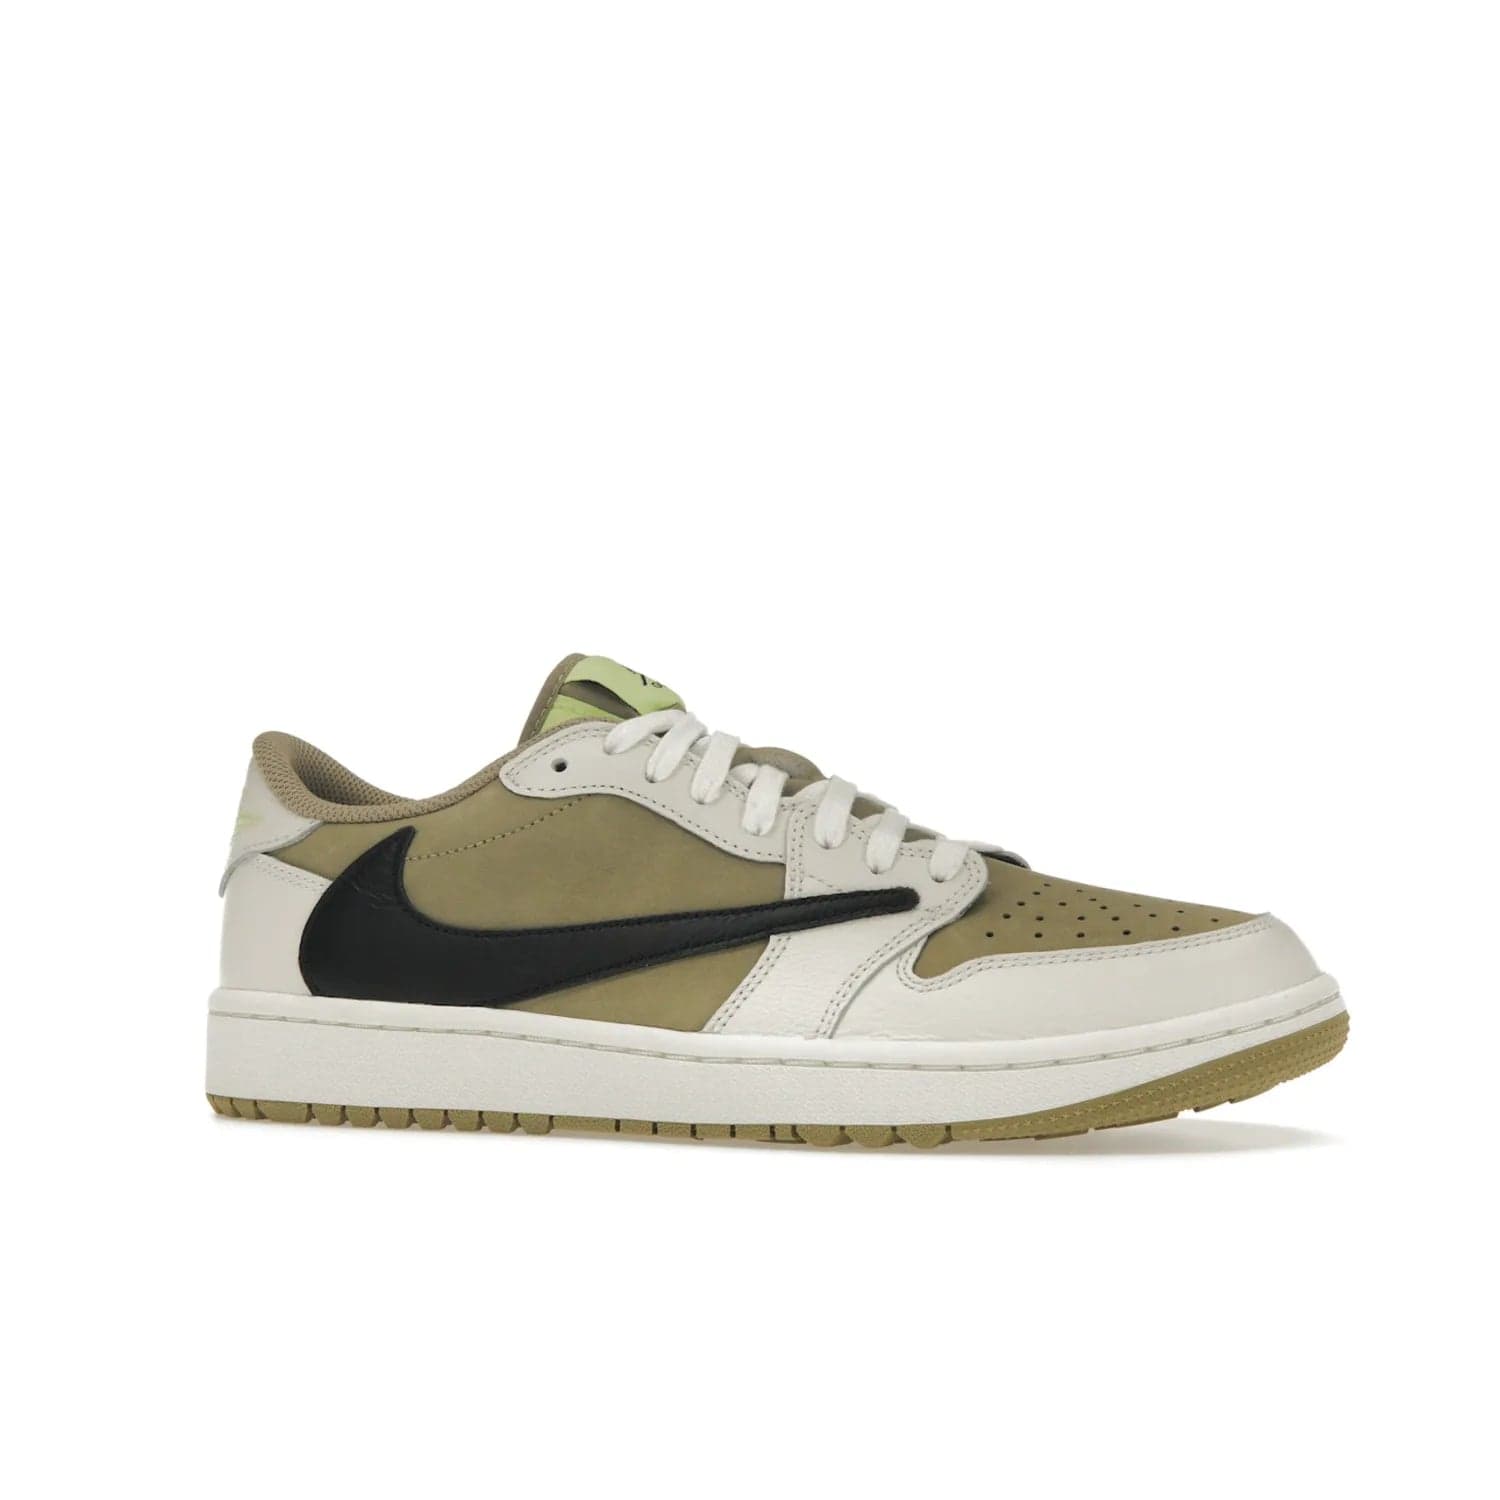 Jordan 1 Retro Low Golf Travis Scott Neutral Olive - Image 3 - Only at www.BallersClubKickz.com - Explore the unique Jordan 1 Retro Low Golf Travis Scott Neutral Olive, an olive-green sneaker collaboration between the iconic Jordan Brand and music royalty, Travis Scott. This special pair is tailored for the golf course with altered traction, hardened rubber, and a sleek style perfect for everyday wear. Get your pair and impress the crowd with its signature earth tones.